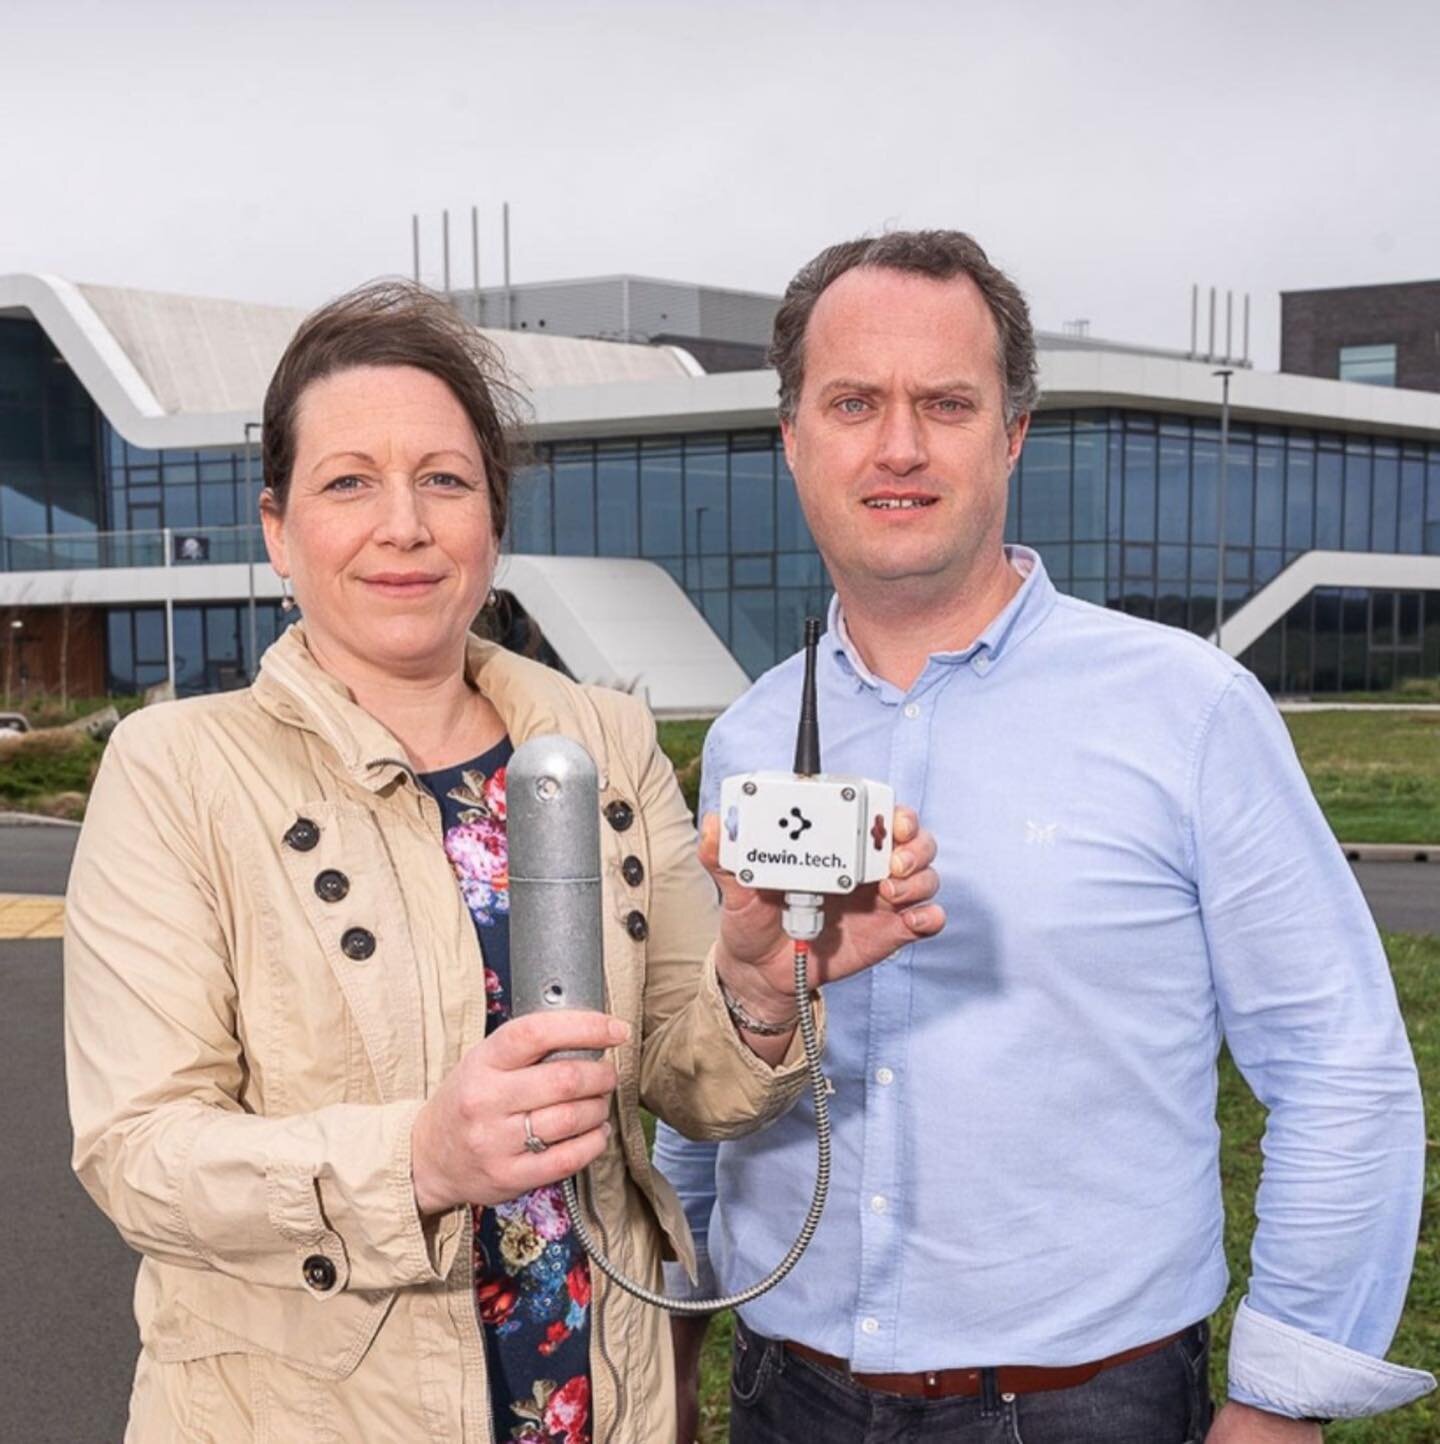 dewin tech is founded by business consulting duo Meinir and Geraint.

As thinkers and innovators, both are committed and passionate to develop the innovative dewin tech technology into all aspect of life in Wales and beyond!

Read more here! https://